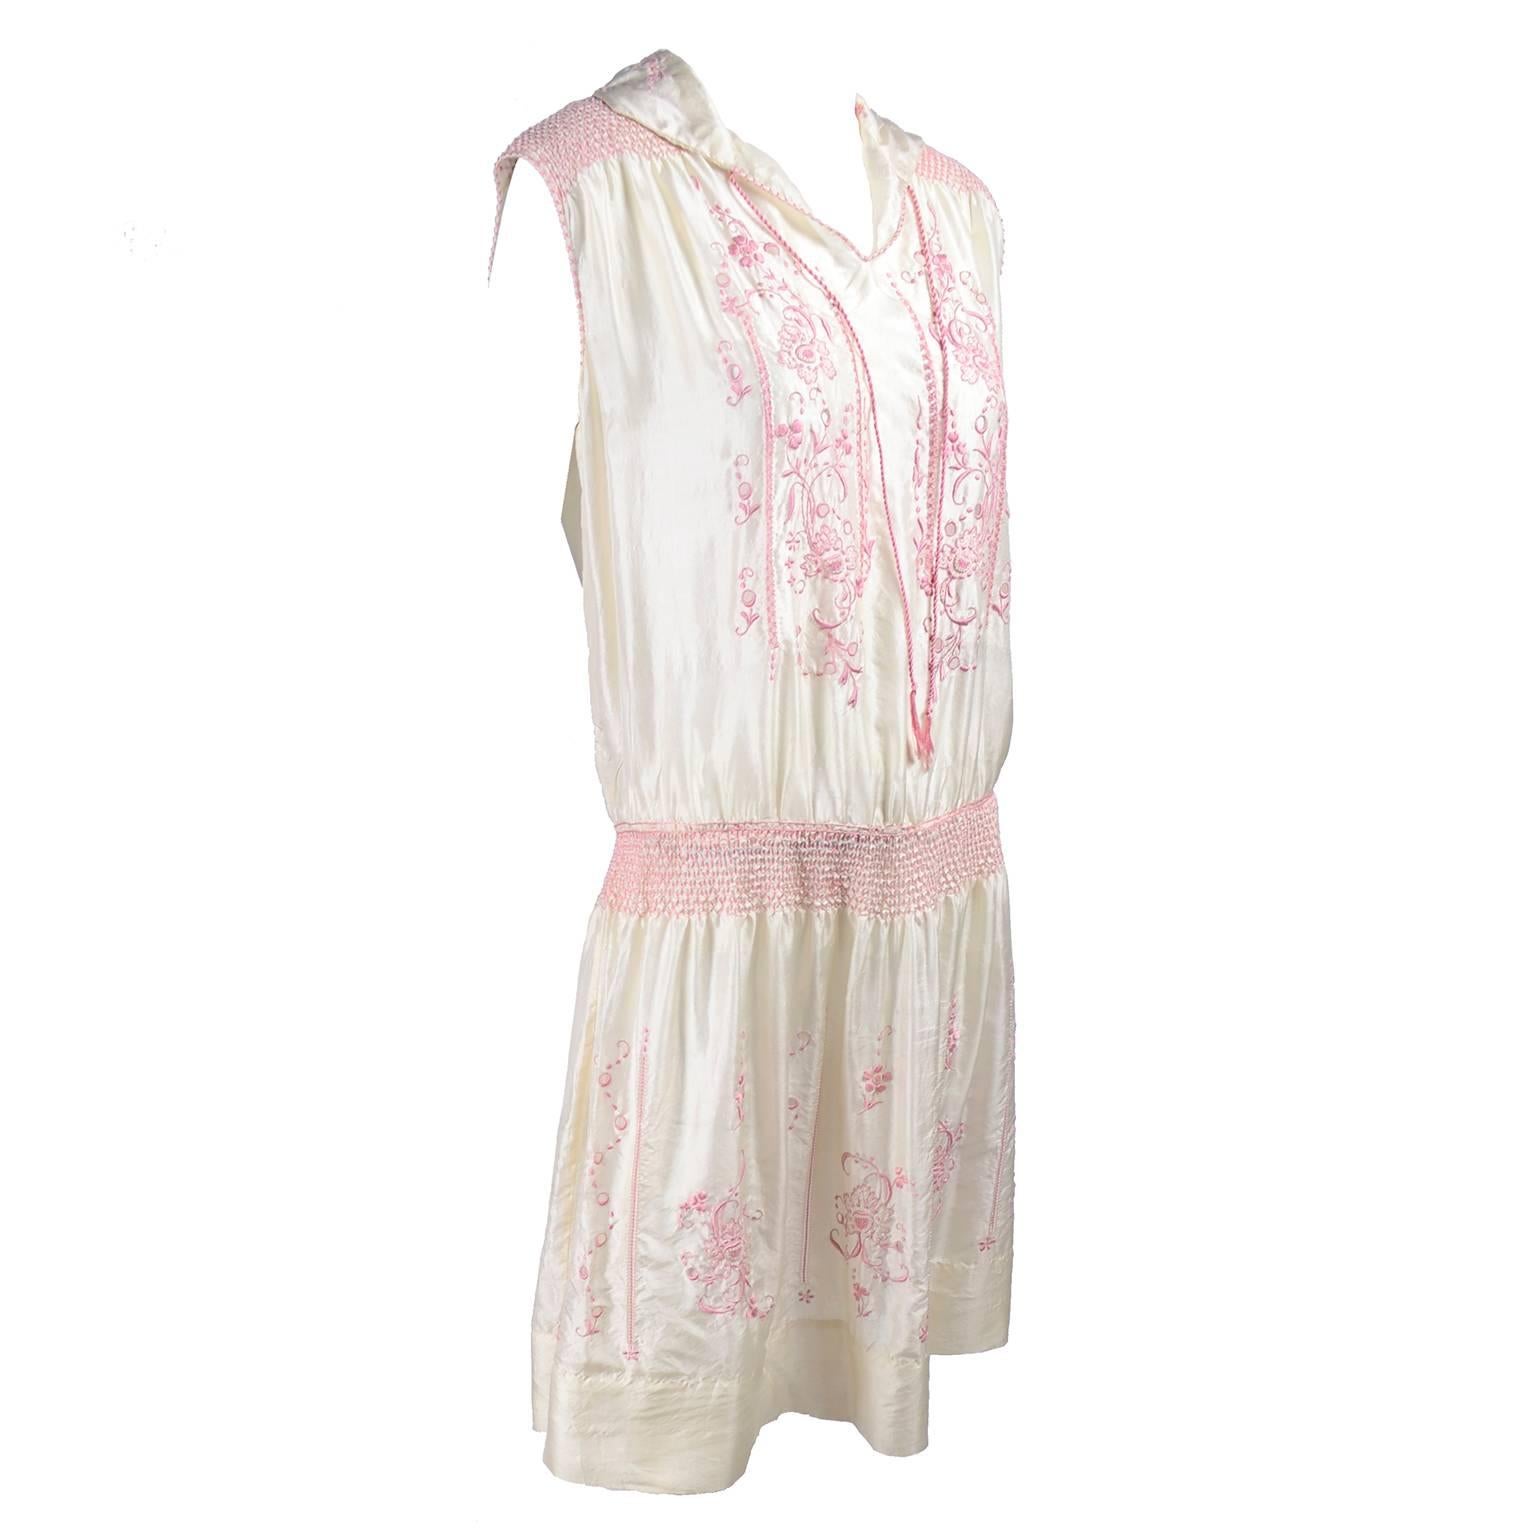 This is a beautiful ivory silk vintage dress from the late 1920's. The dress is sleeveless, with a pink silk braided tie at the neck and it is decorated with gorgeous pink embroidery, smock pleating, cutwork and topstitching.  We acquired the dress